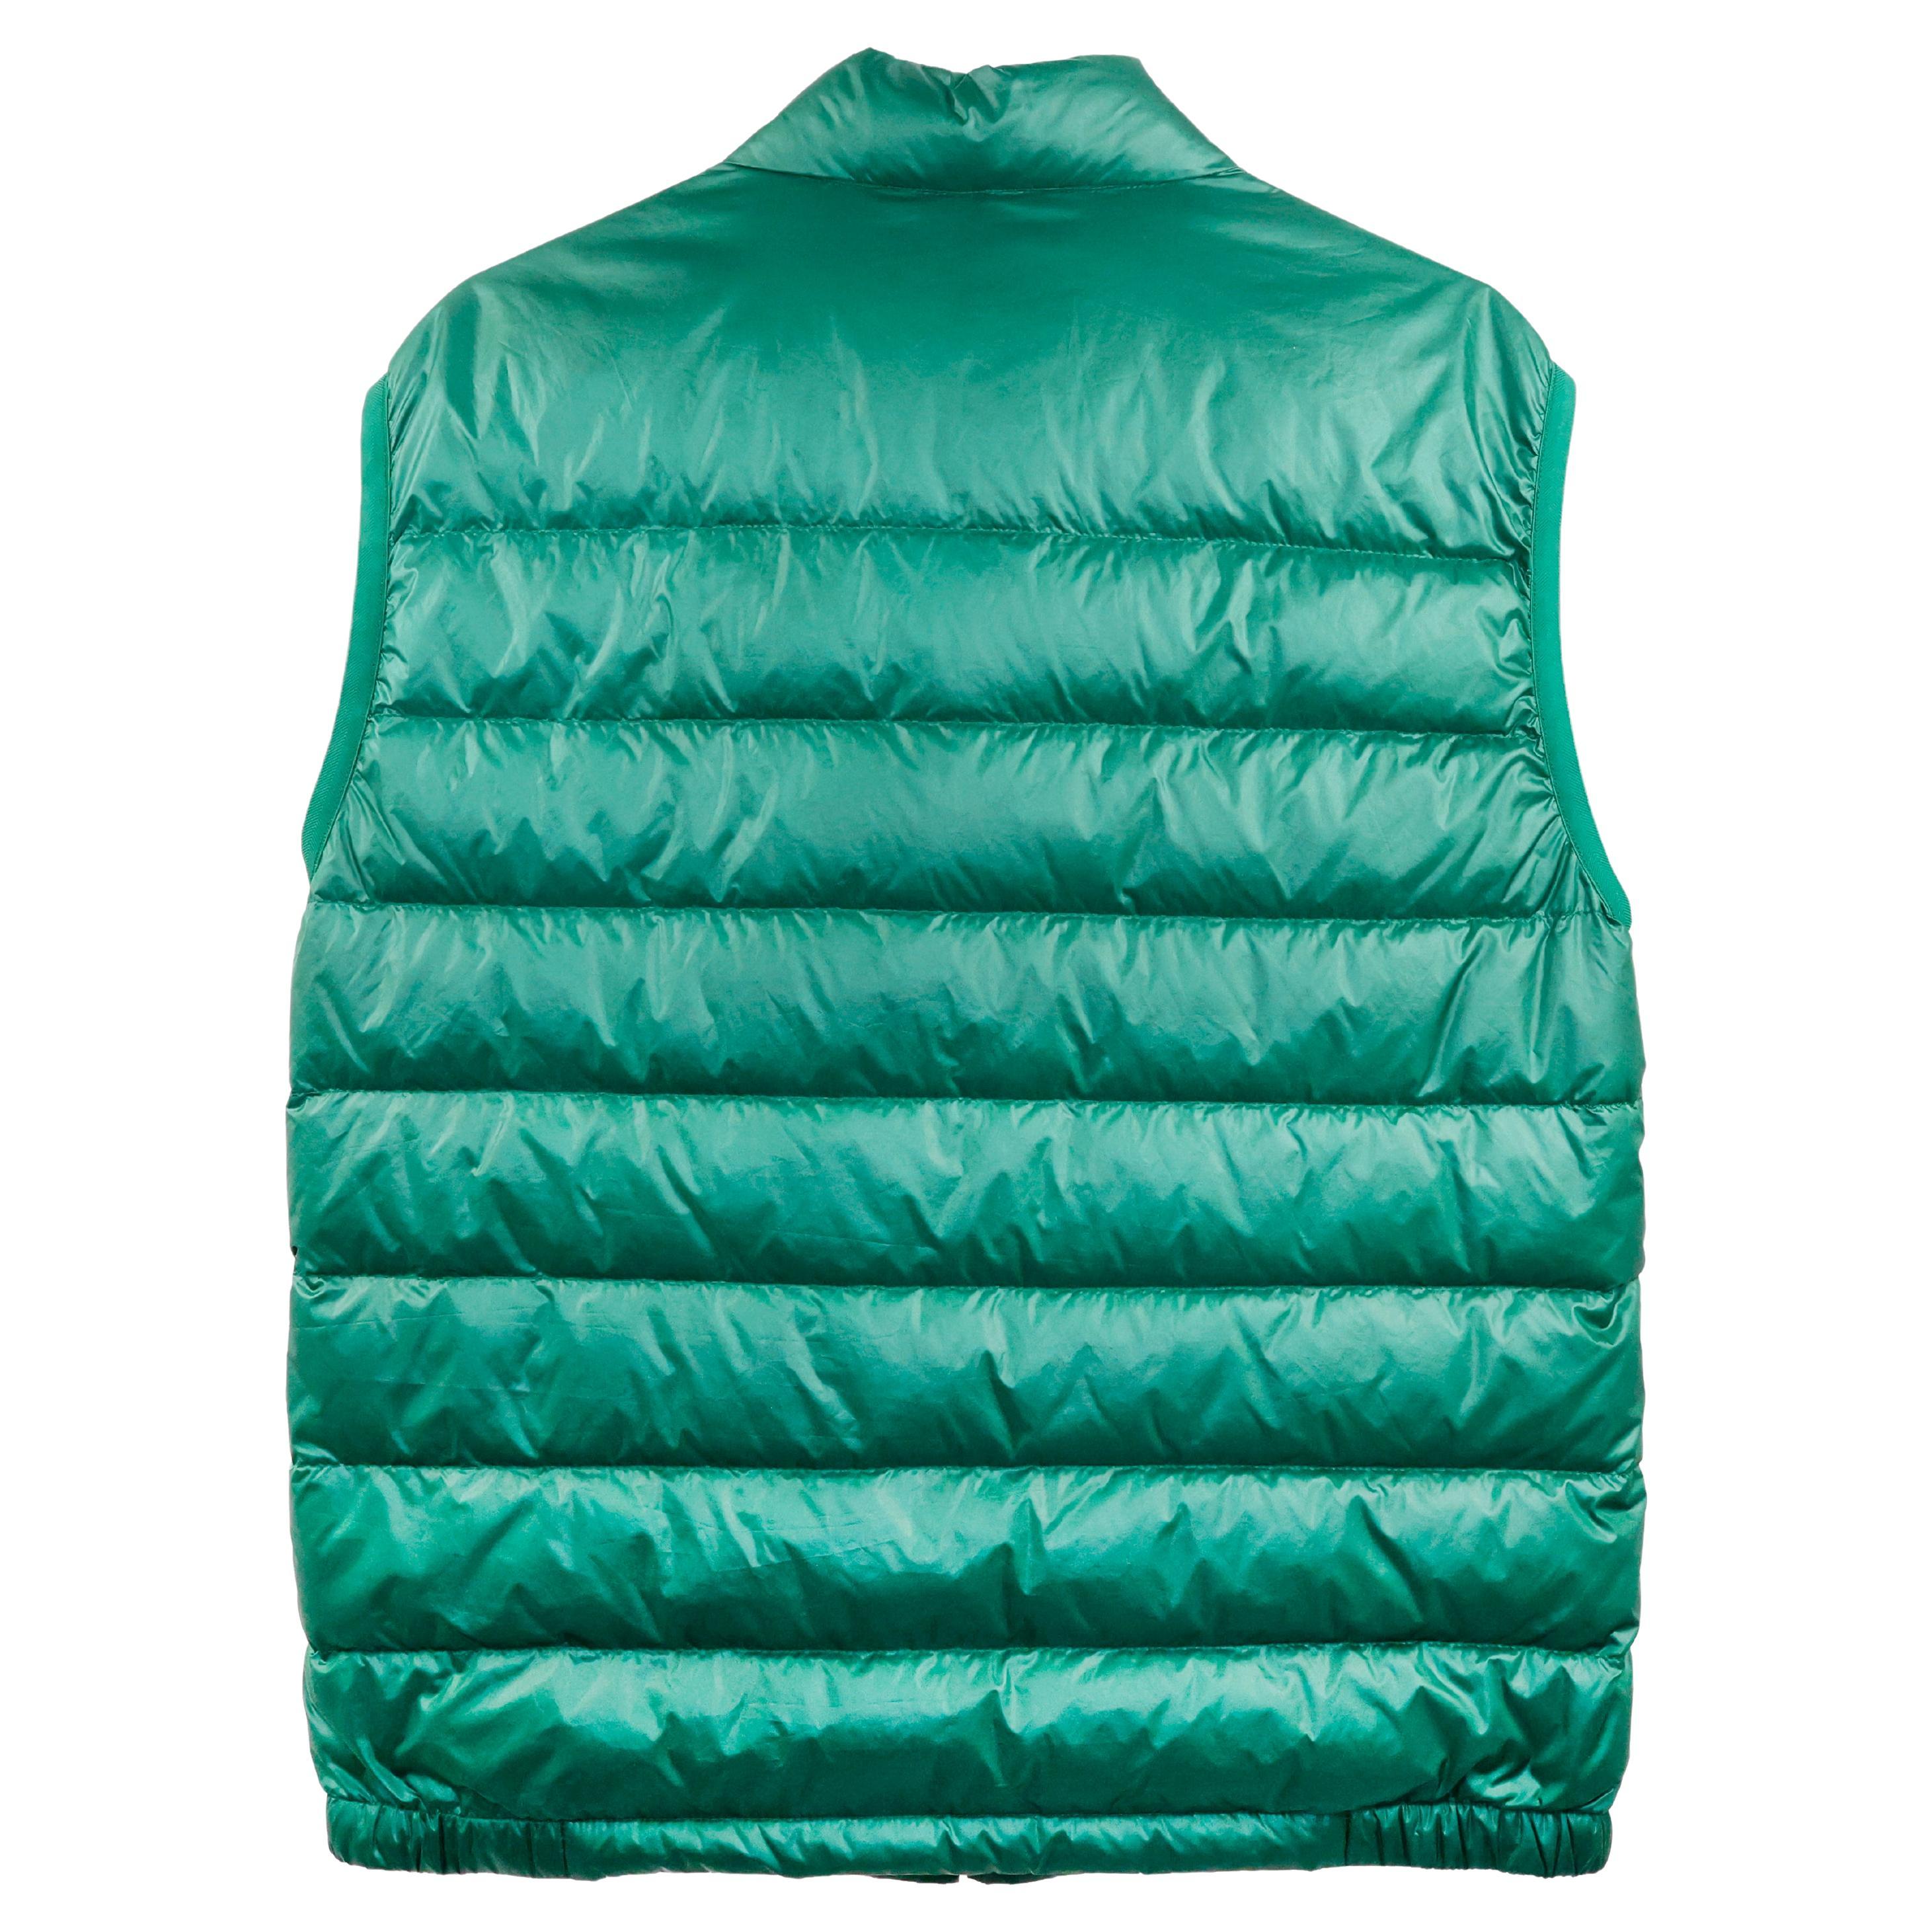 Prada sleeveless puffer jacket in nylon color green, size 50 IT. Unisex.


Condition:
Really good.


Packing/accessories:
Hanger.